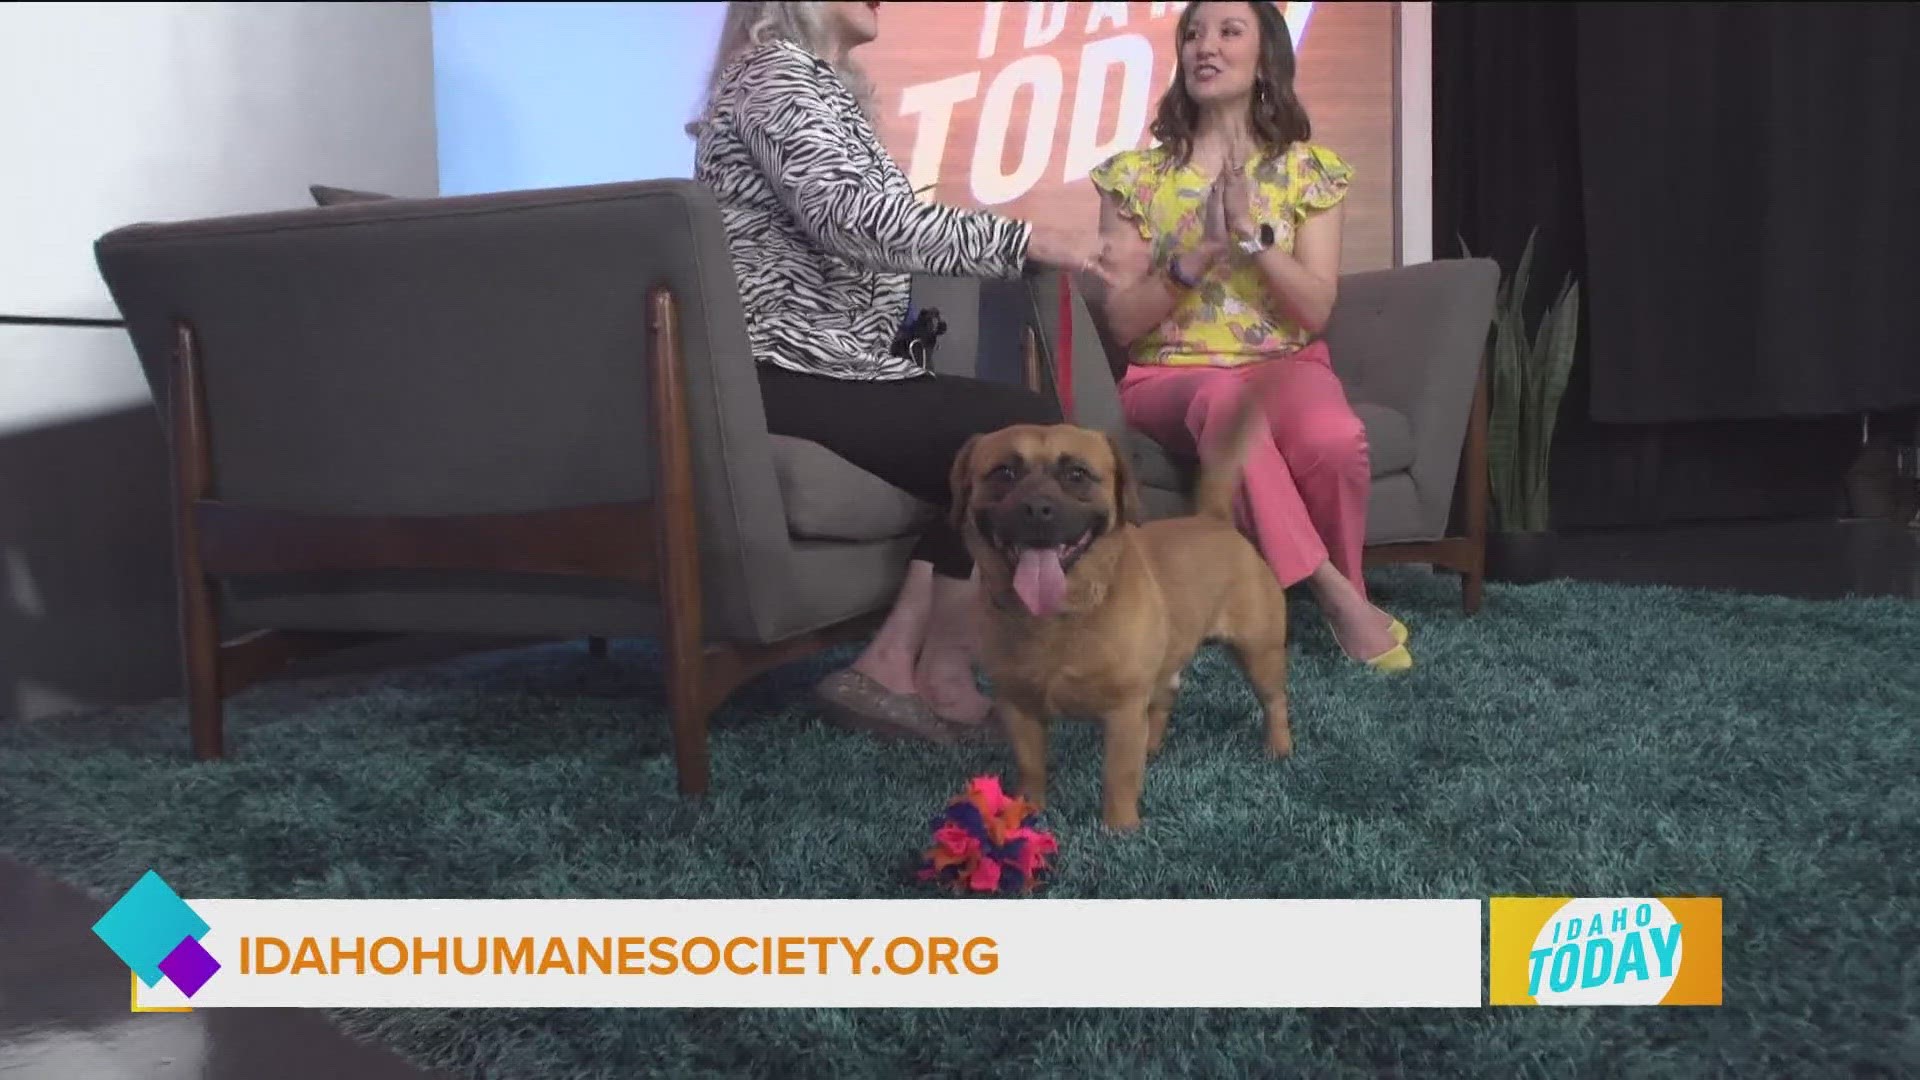 Get to know happy-go-lucky Chuck from the Idaho Humane Society.